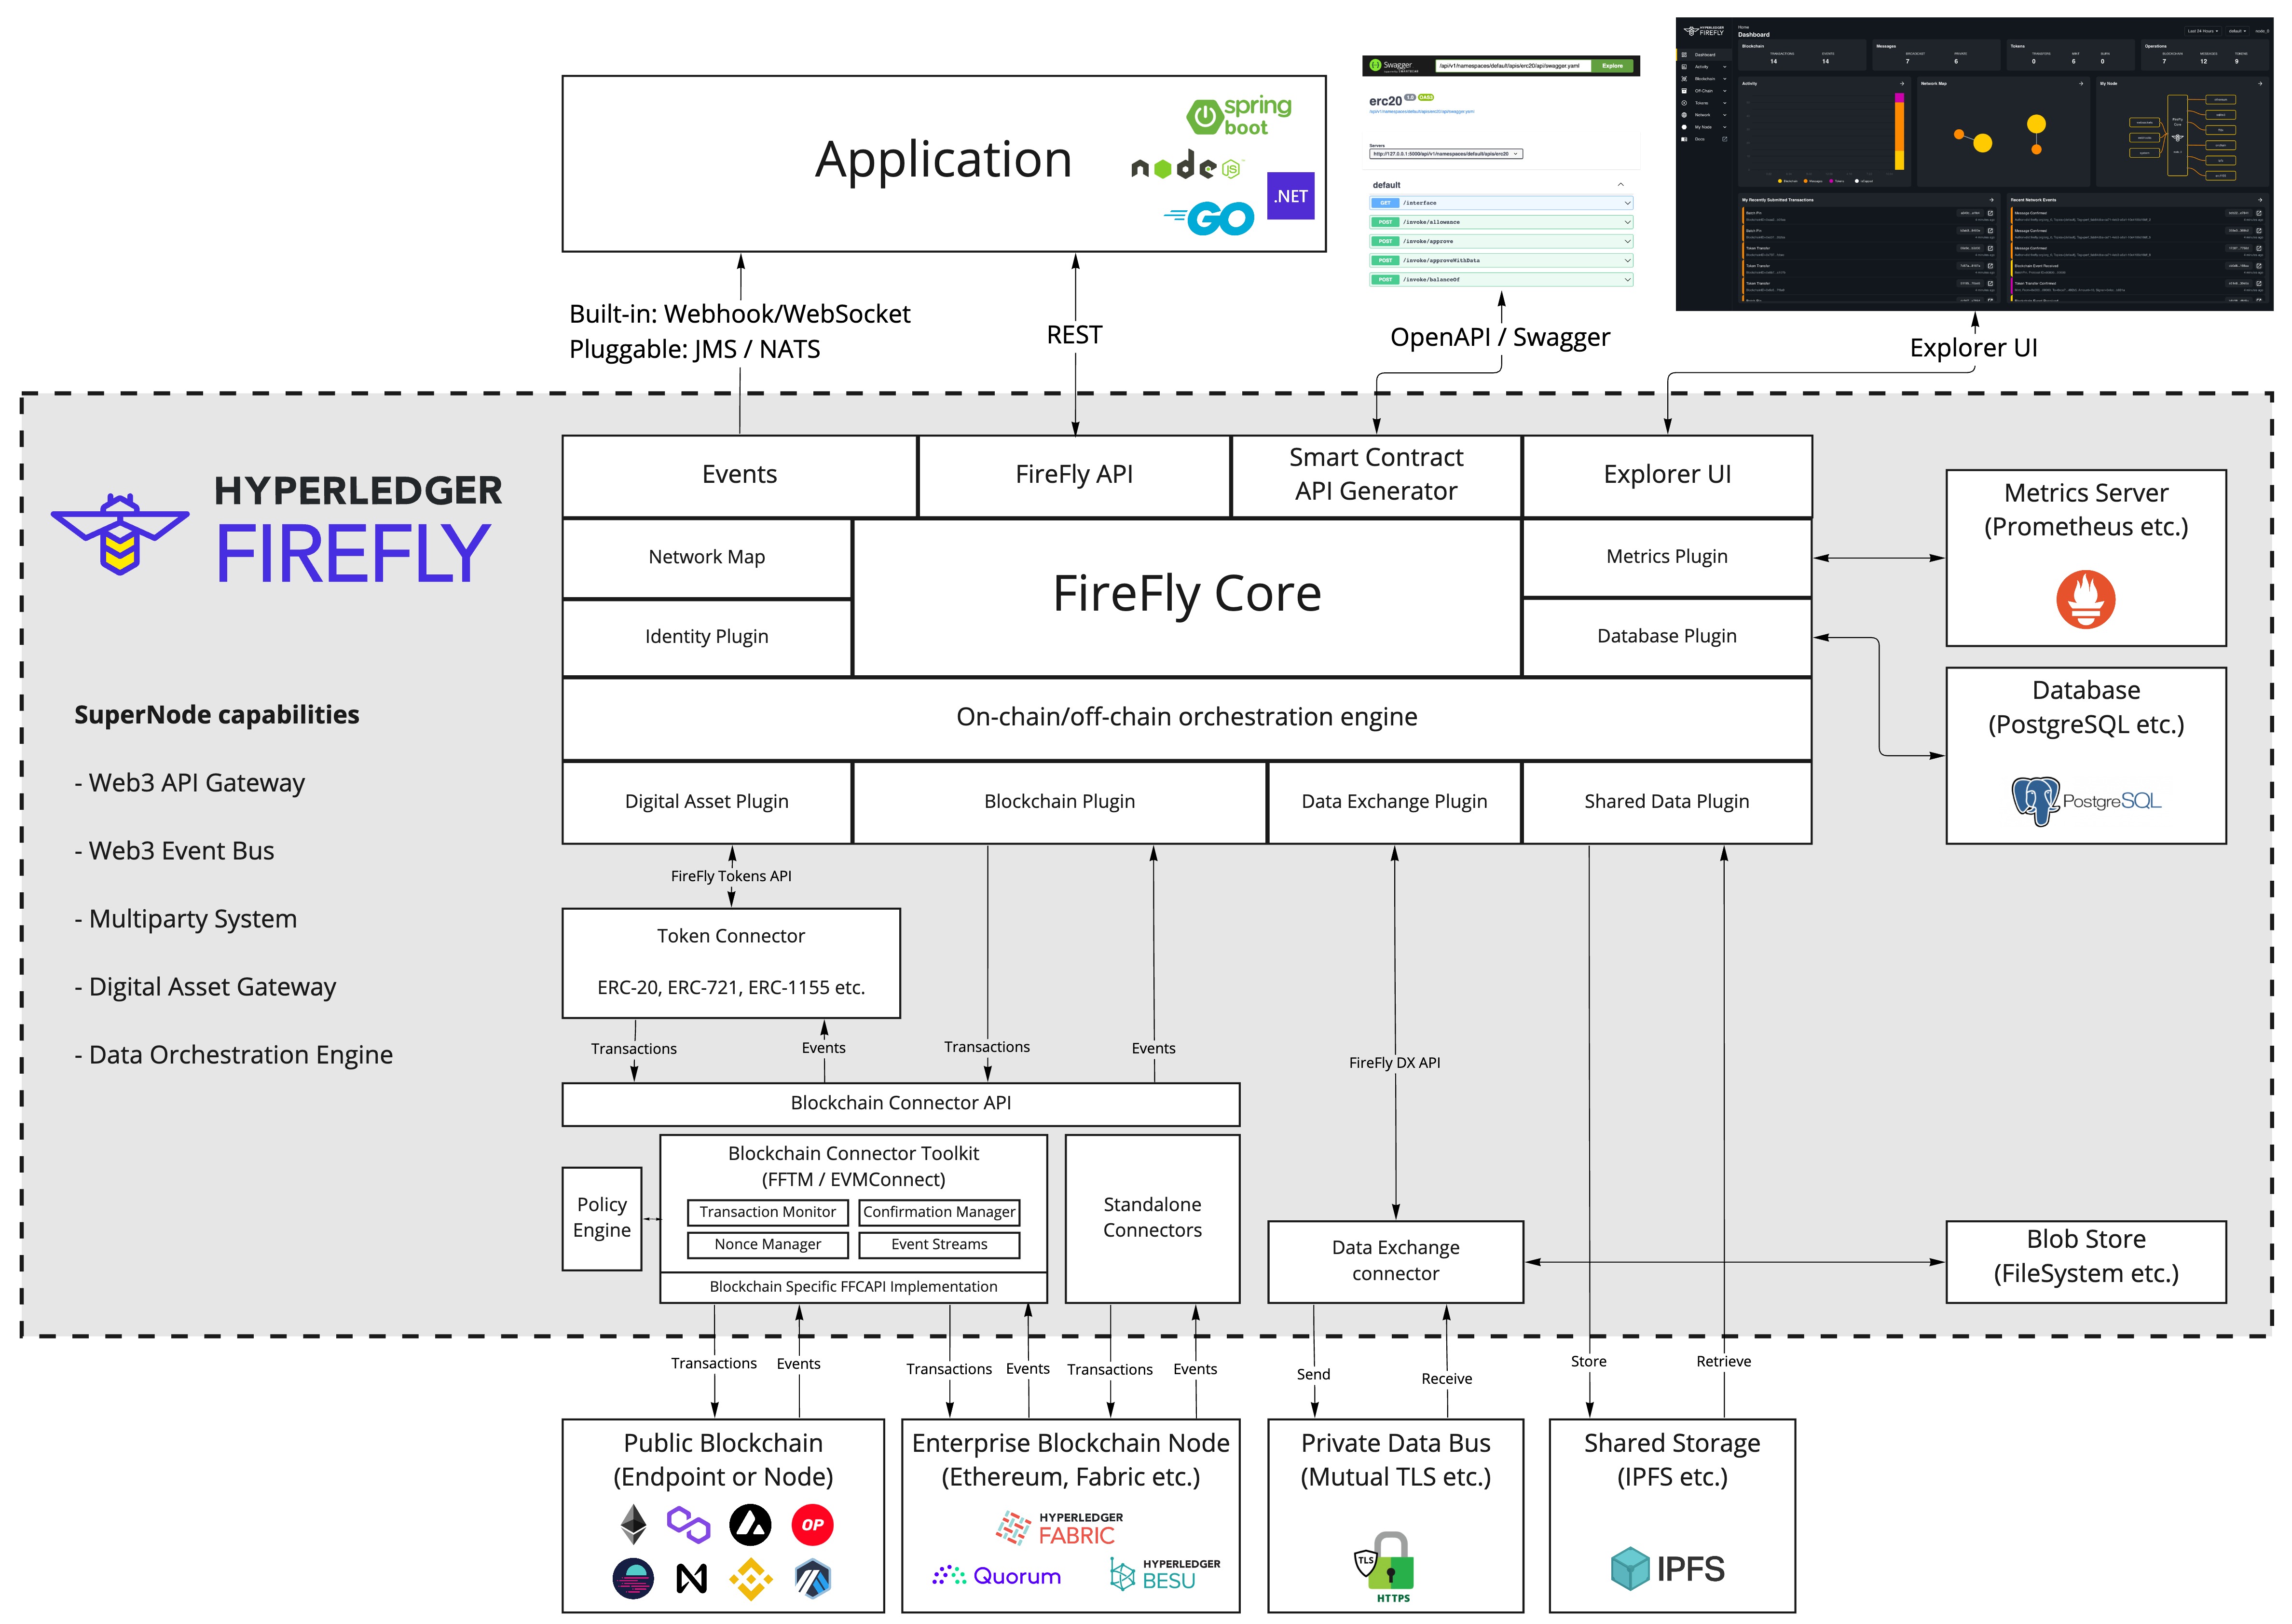 Hyperledger FireFly Architecture Overview